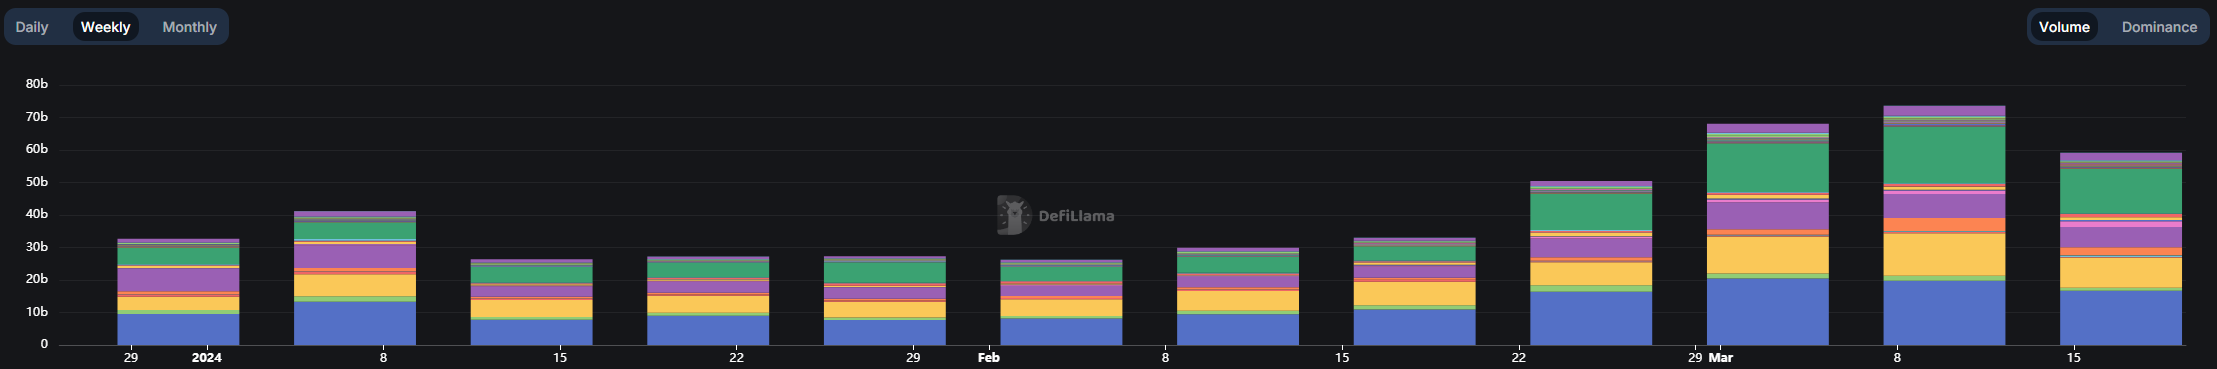 DeFi weekly trading volume falls by 25% due to pullback in crypto prices